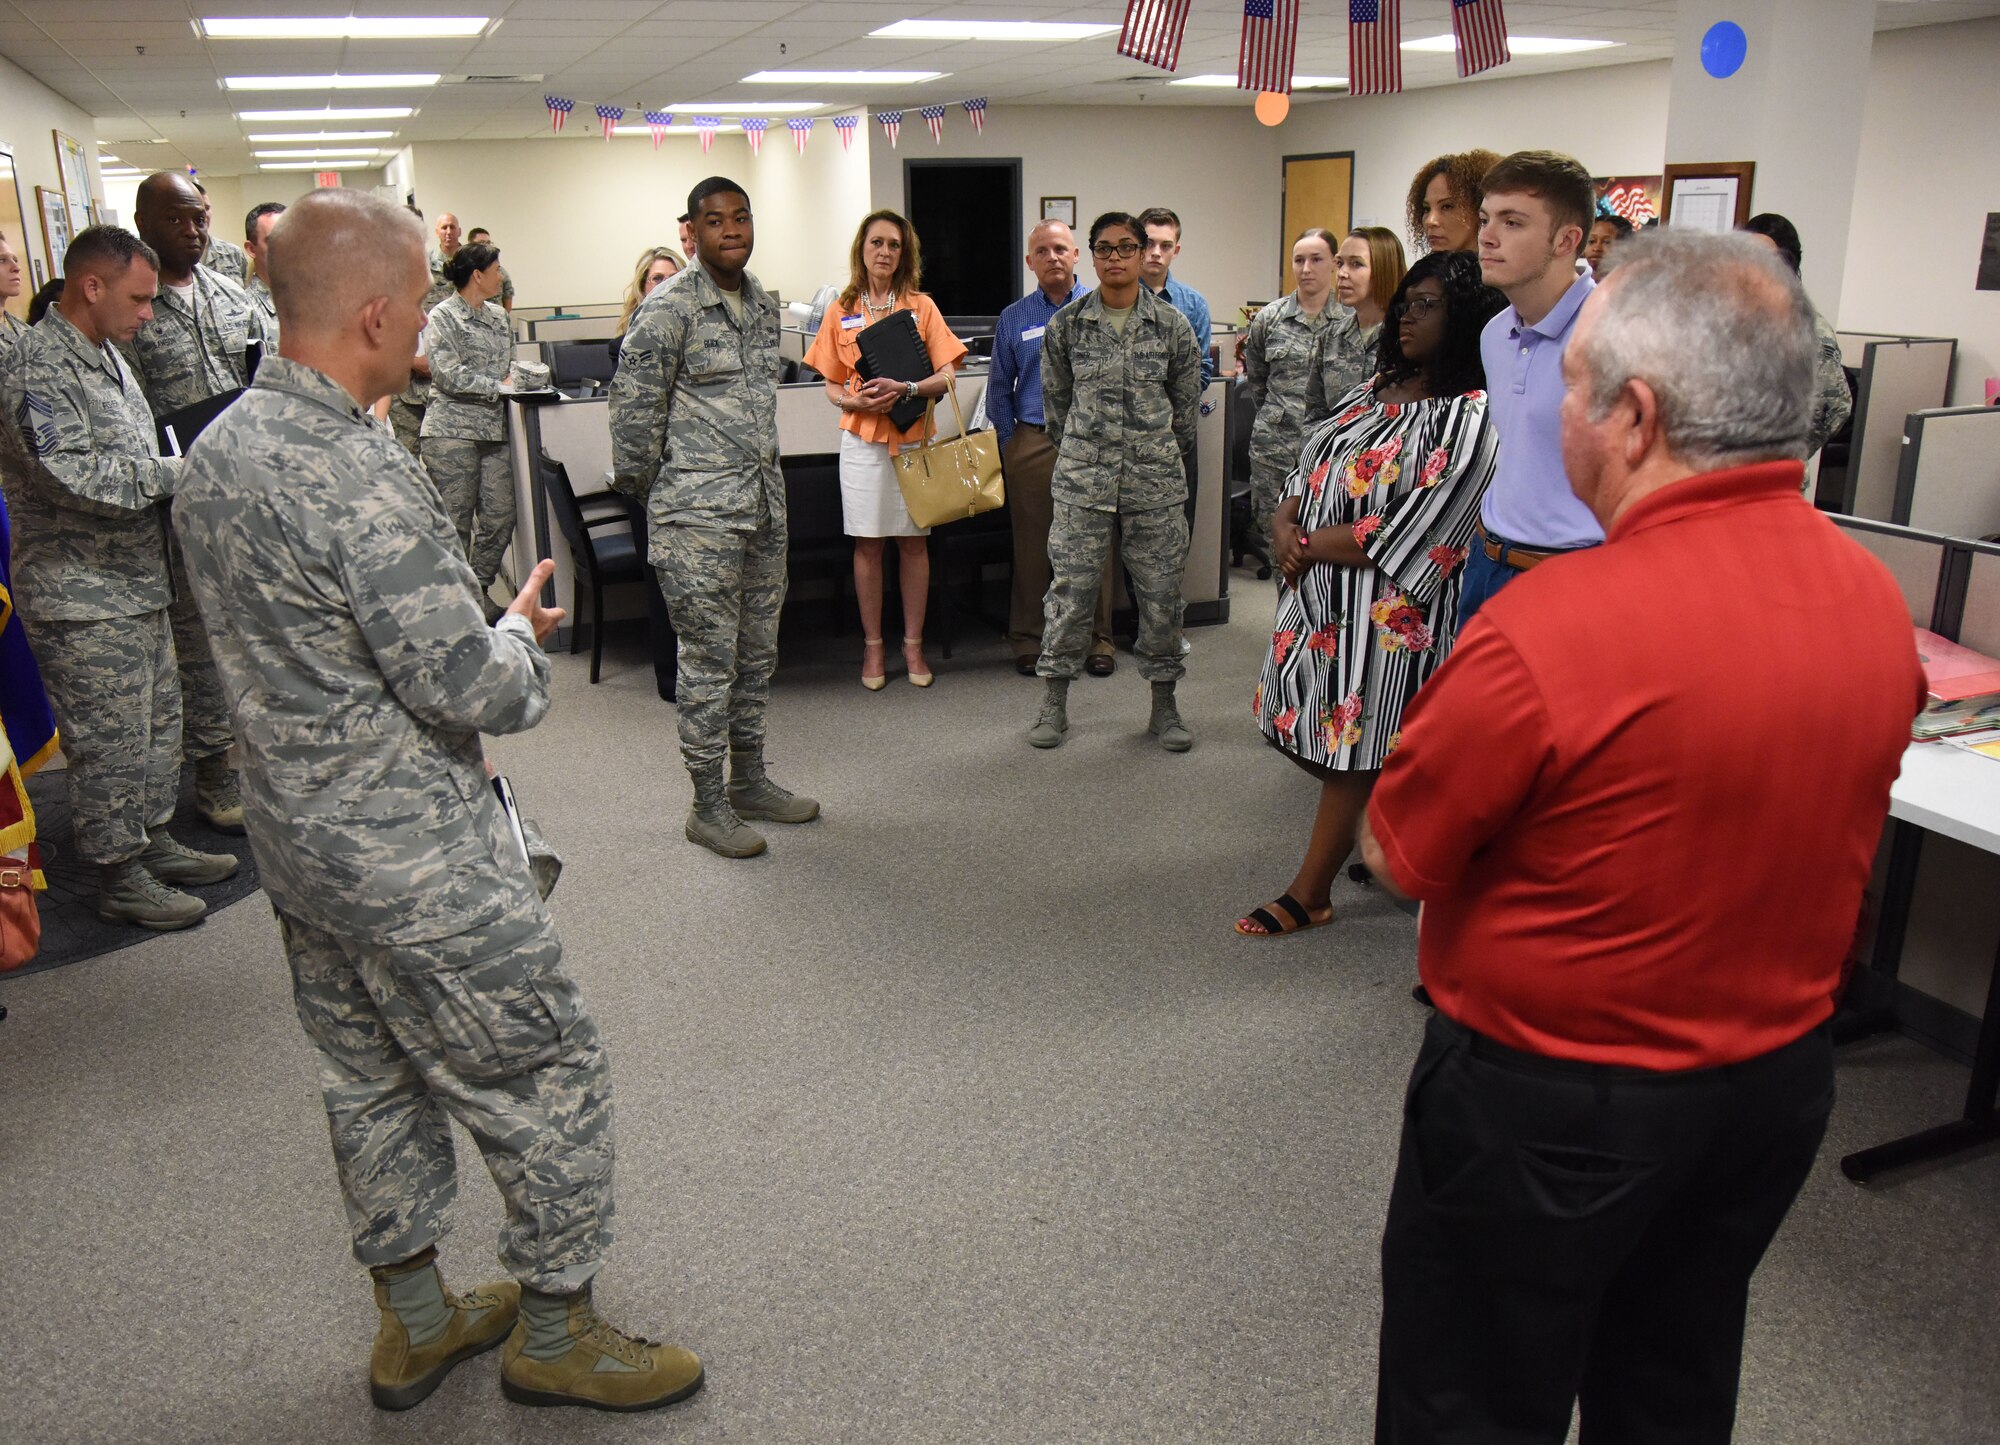 U.S. Air Force Lt. Gen. Steven Kwast, Air Education and Training Command commander, speaks to members of the student personnel center at the Levitow Training Support Facility during an immersion tour at Keesler Air Force Base, Mississippi, July 16, 2018. Kwast also received a tour of Cody Hall and the Keesler Medical Center to become more familiar with Keesler’s mission. (U.S. Air Force photo by Kemberly Groue)